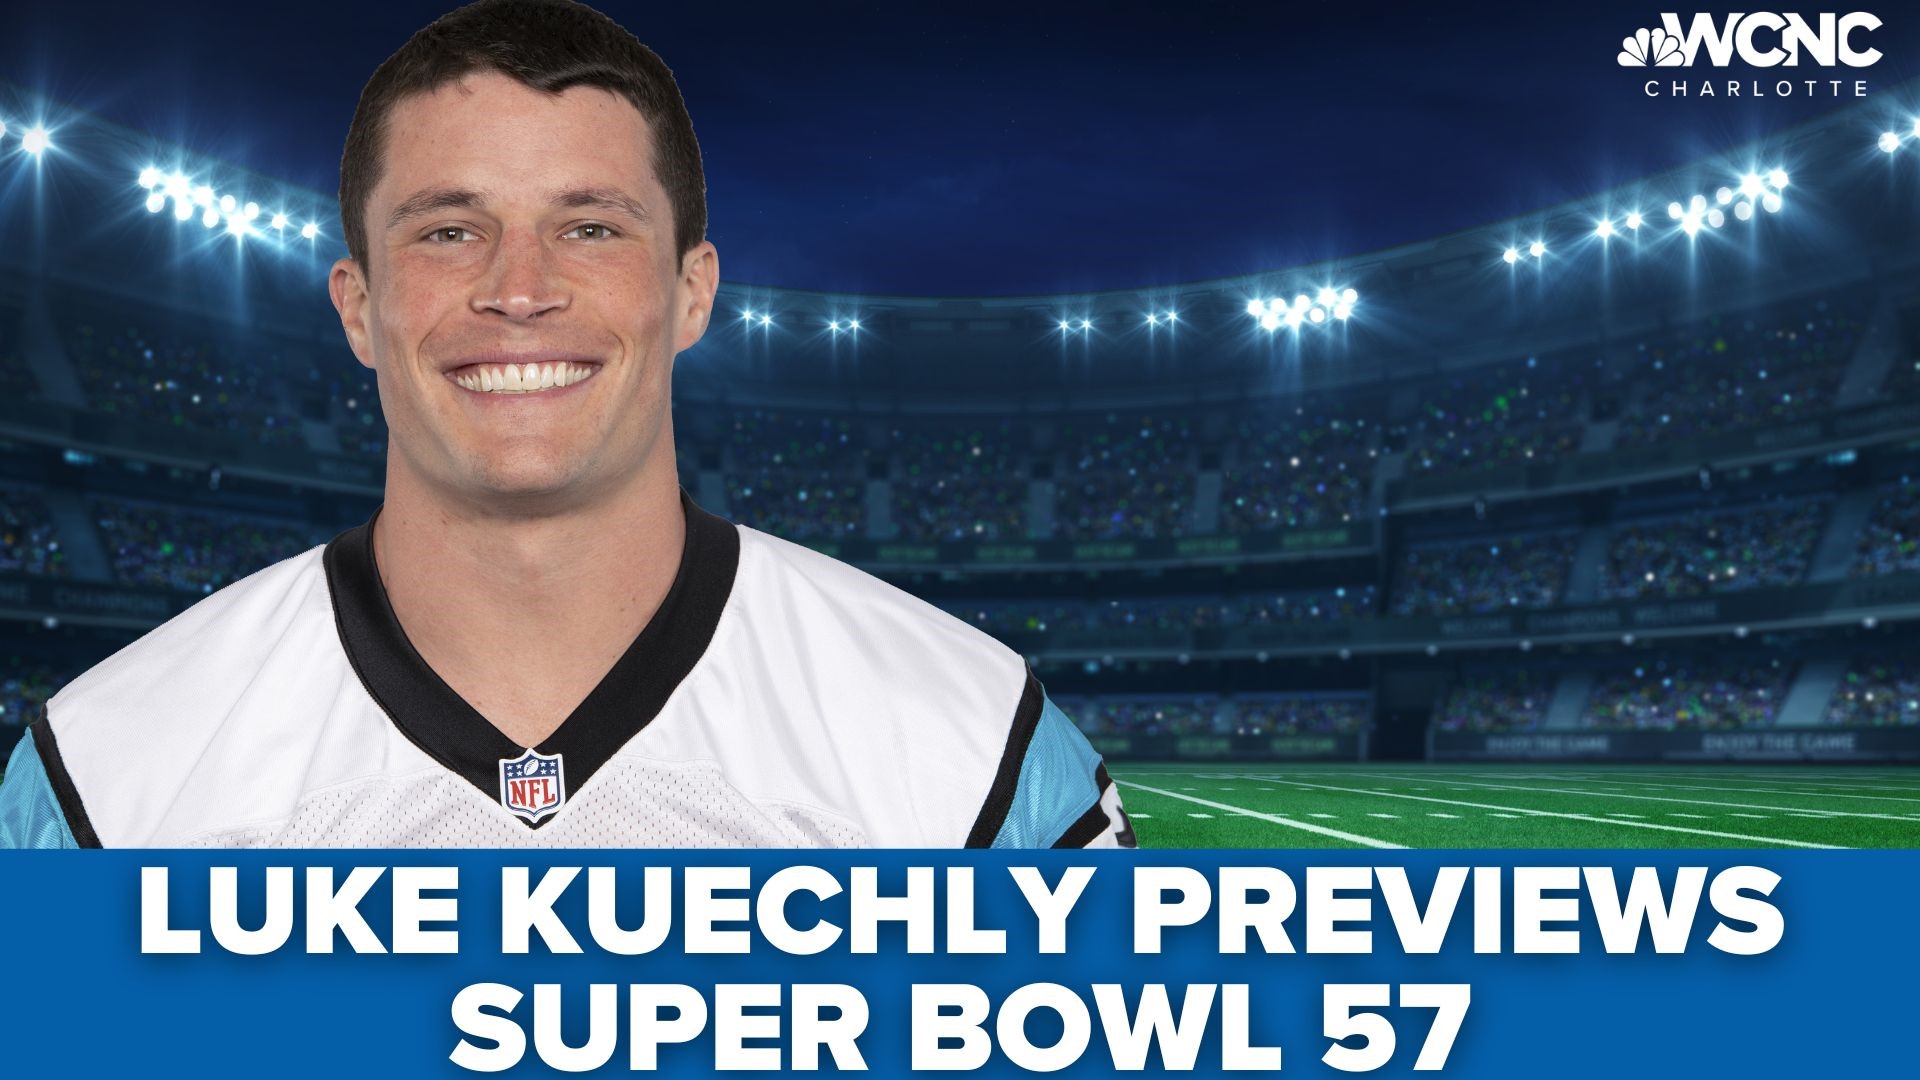 Former Carolina Panthers linebacker Luke Kuechly joins #WakeUpCLT To Go for a Super Bowl 57 preview and makes his prediction for the big game!